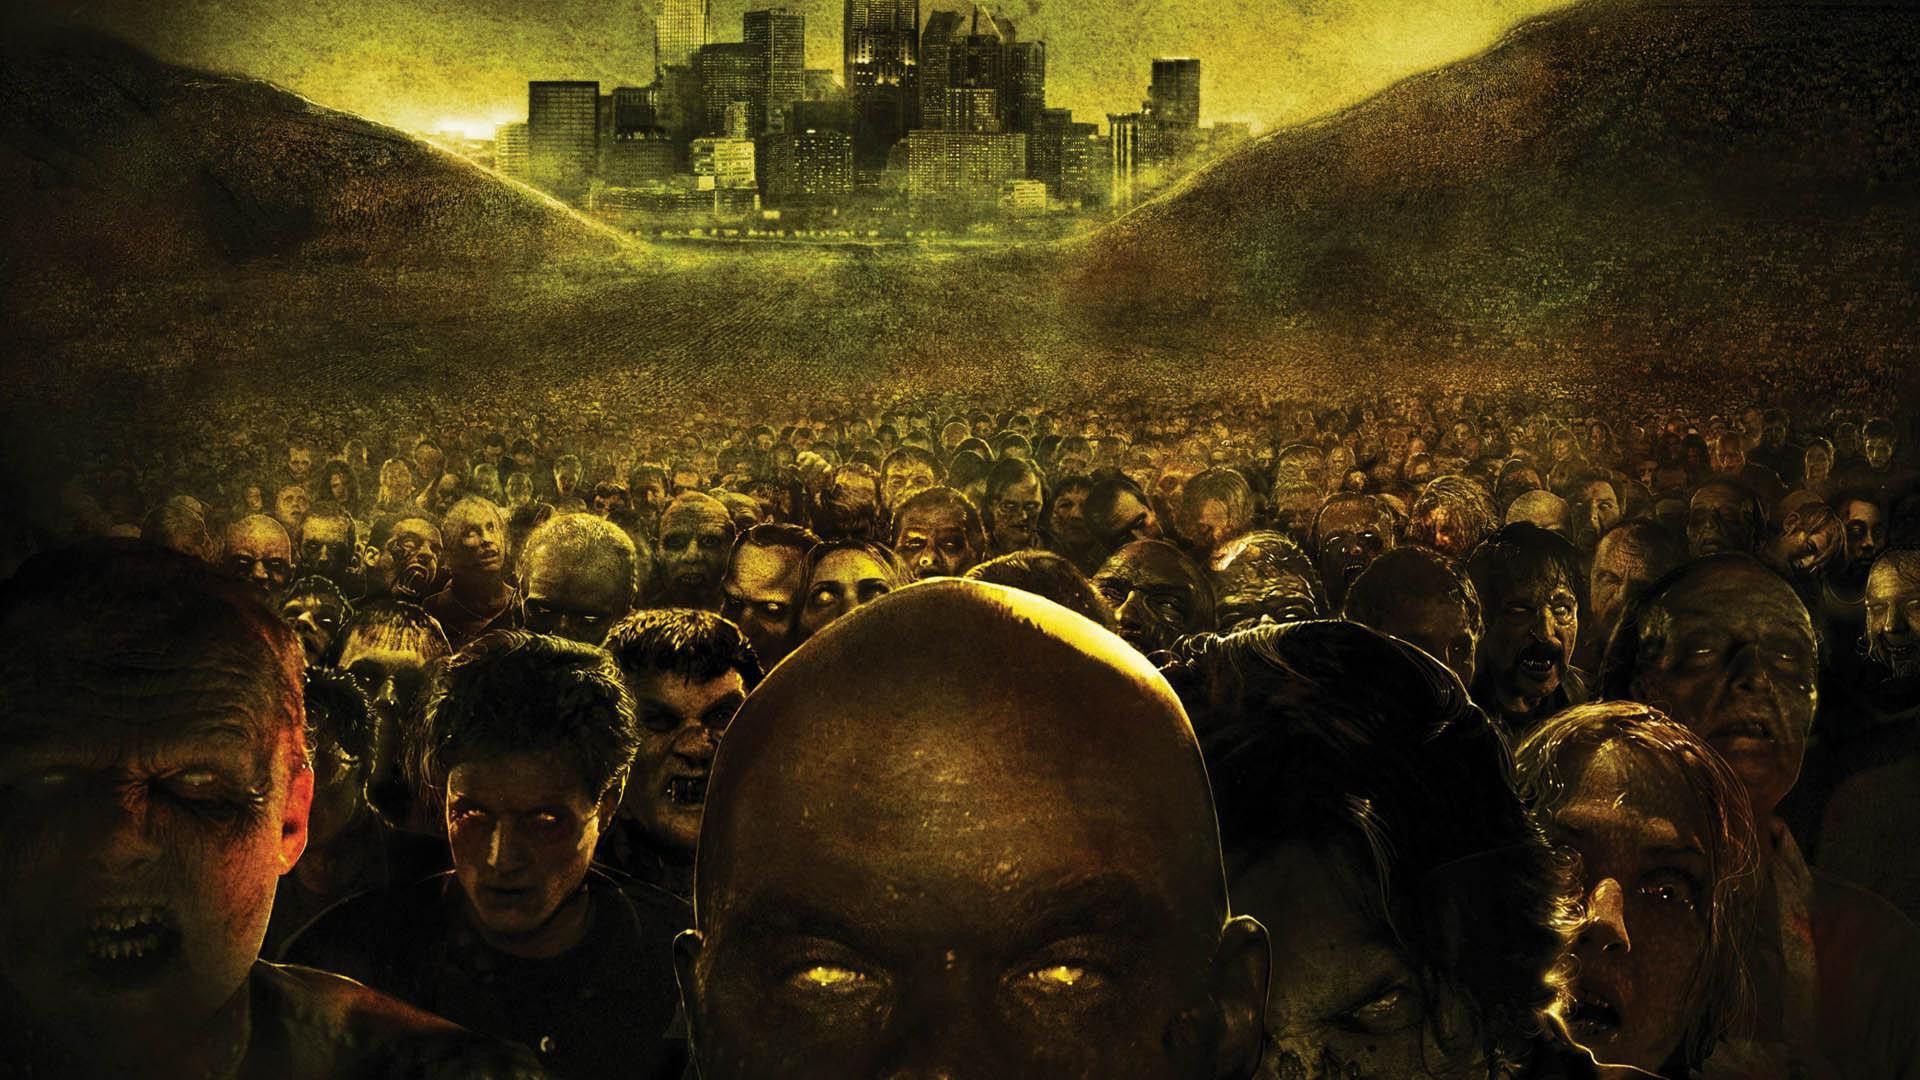 Zombies, eye, army, 1920x1080 HD Wallpaper and FREE Stock Photo